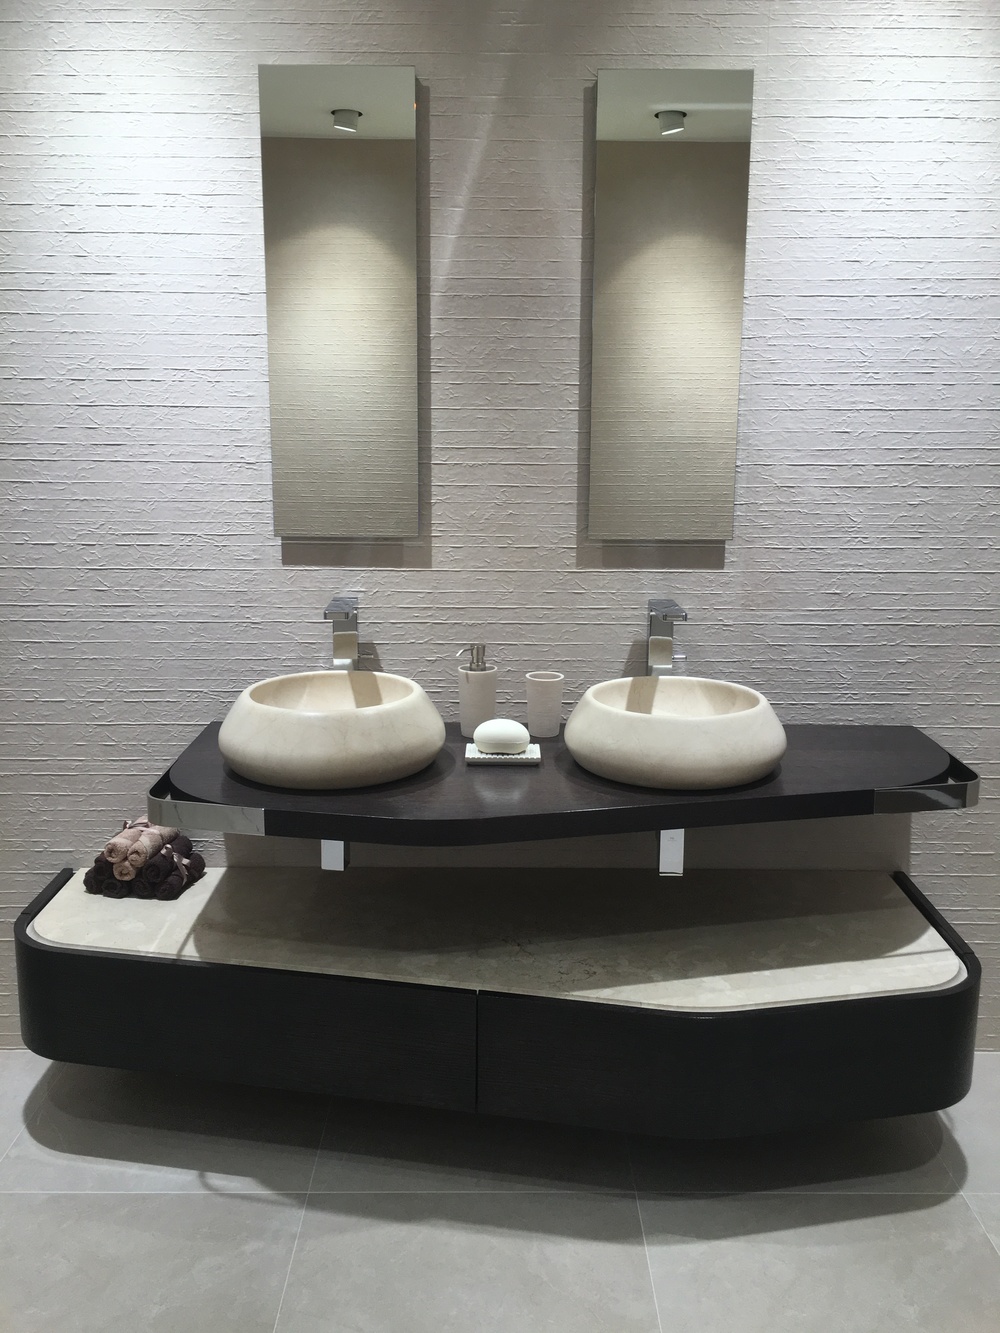 Couple's sinks with asymmetric detail and beautifully shaped bowls